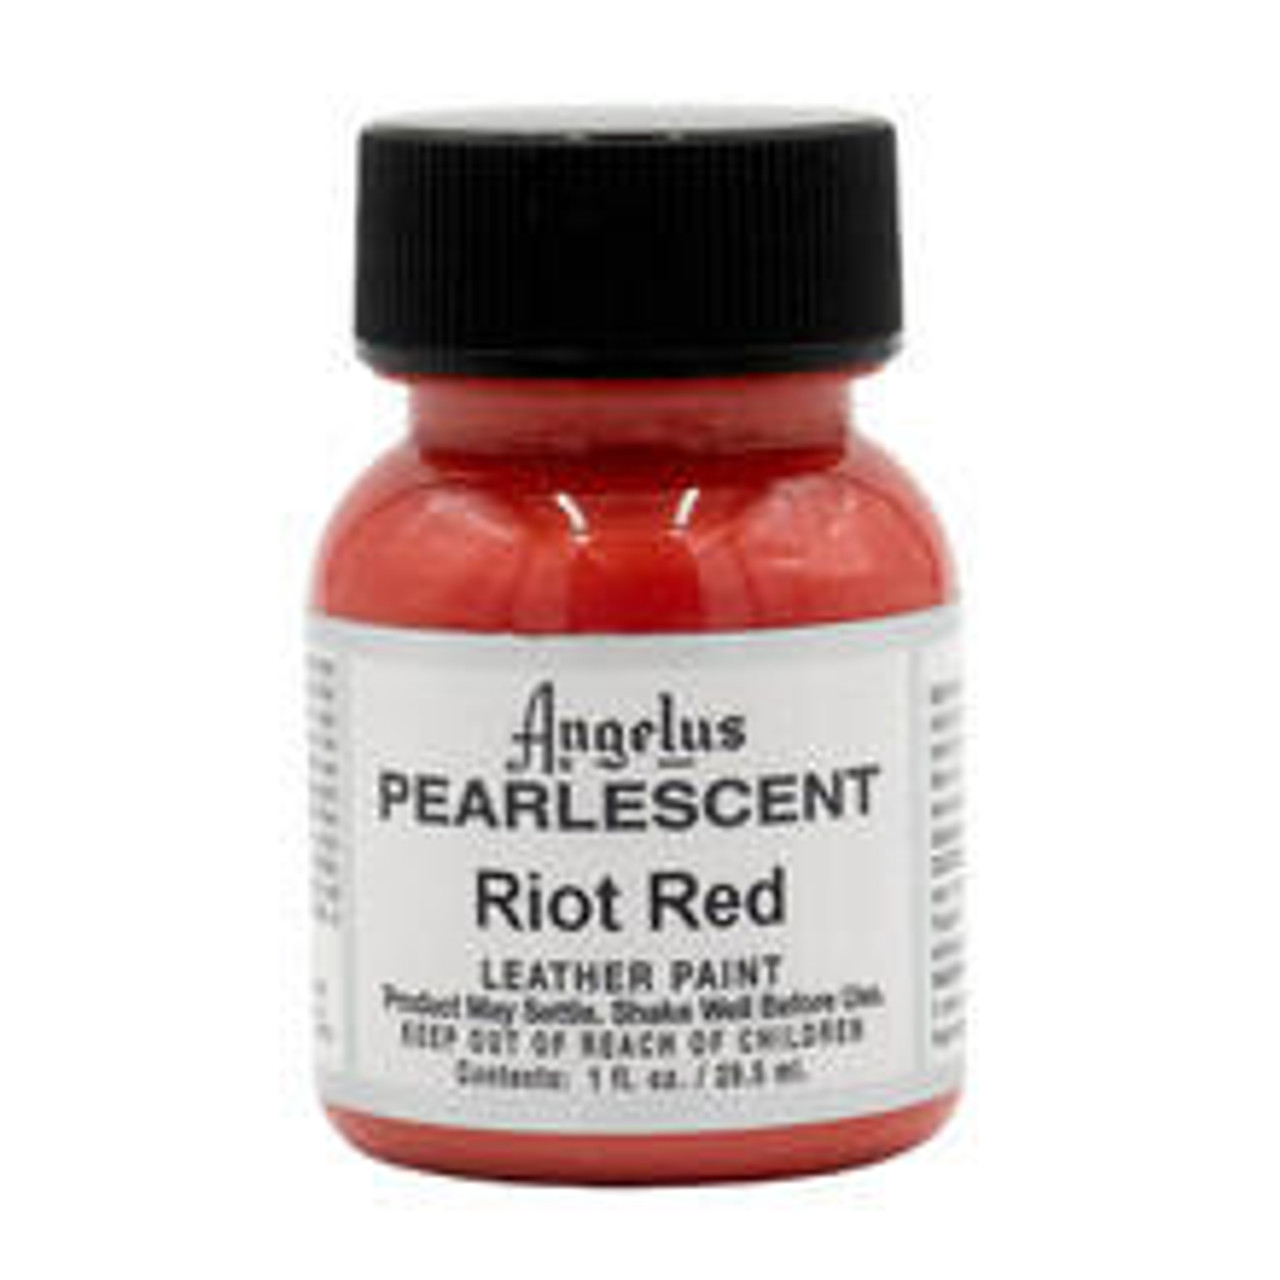 Angelus Pearlescent Leather Paint - Riot Red, 1 oz